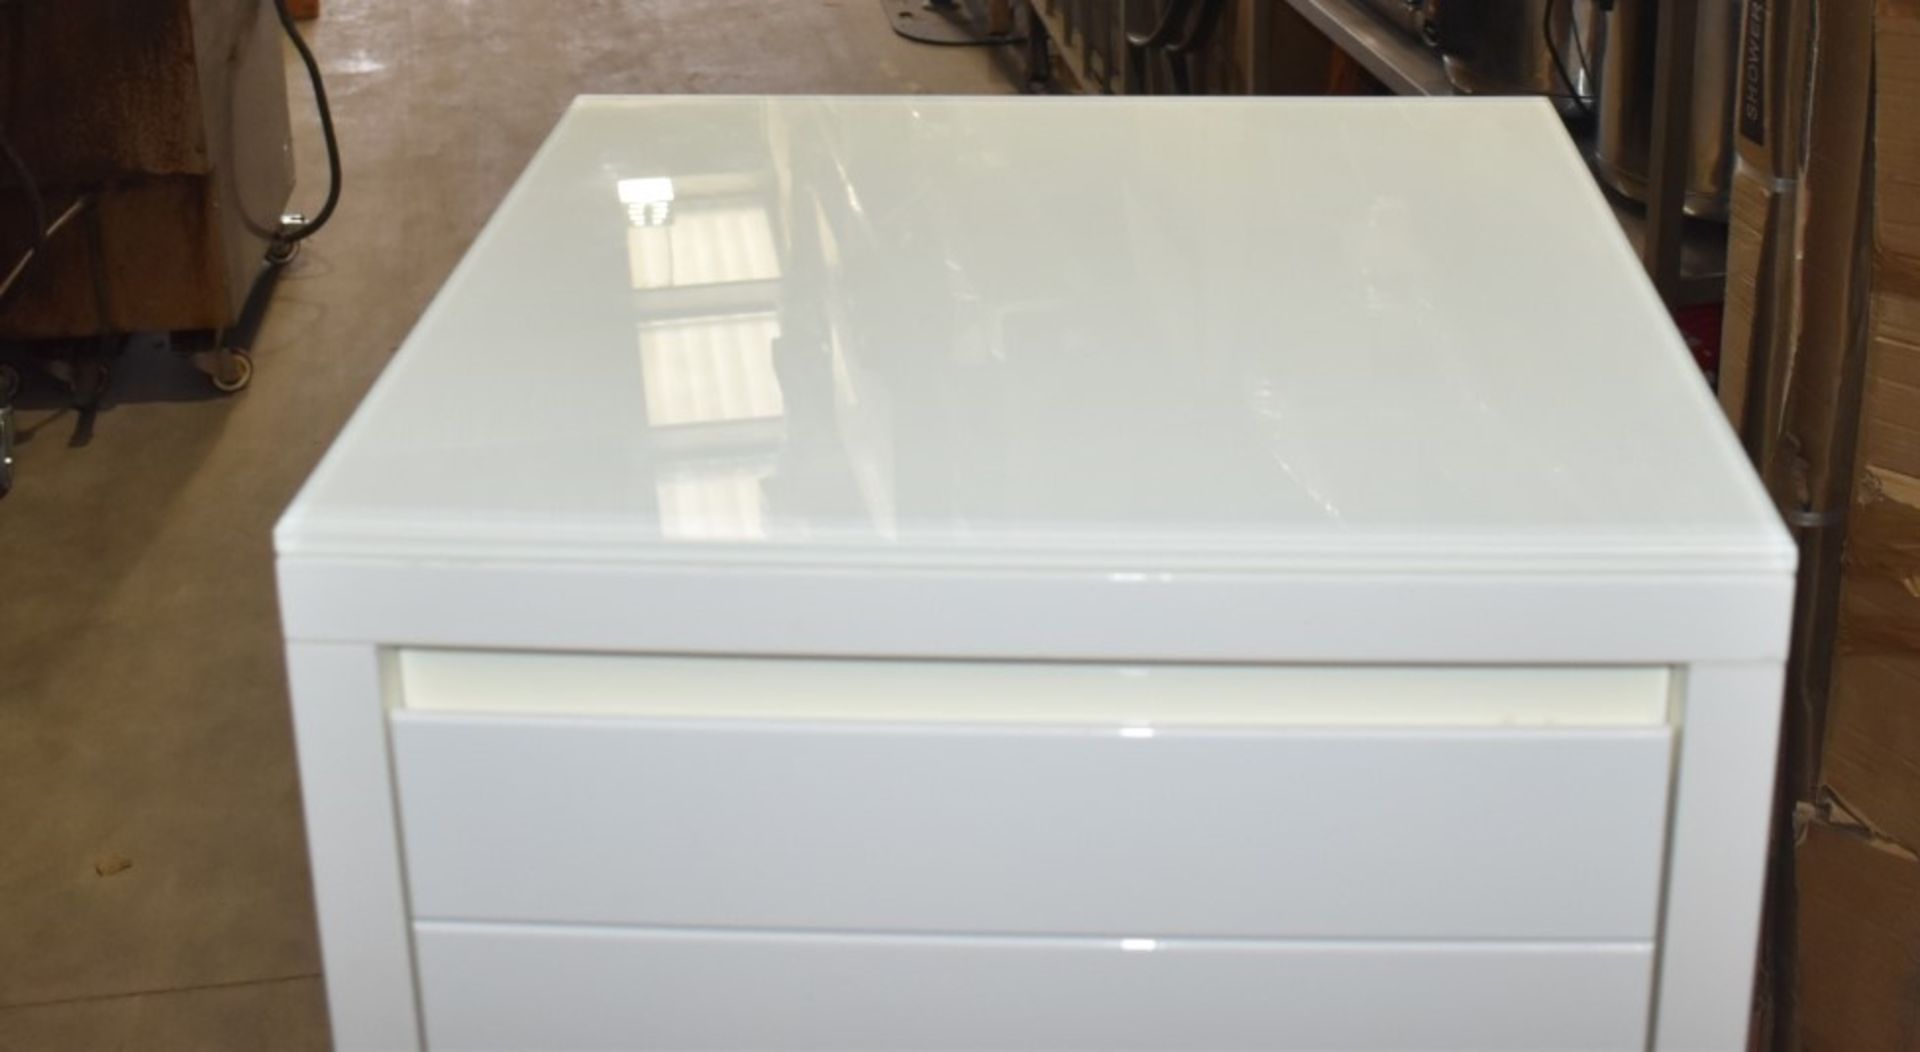 1 x Set of Seven Casabella Adria Bedroom Drawers - White Gloss With Glass Top and Soft Close Drawers - Image 3 of 6